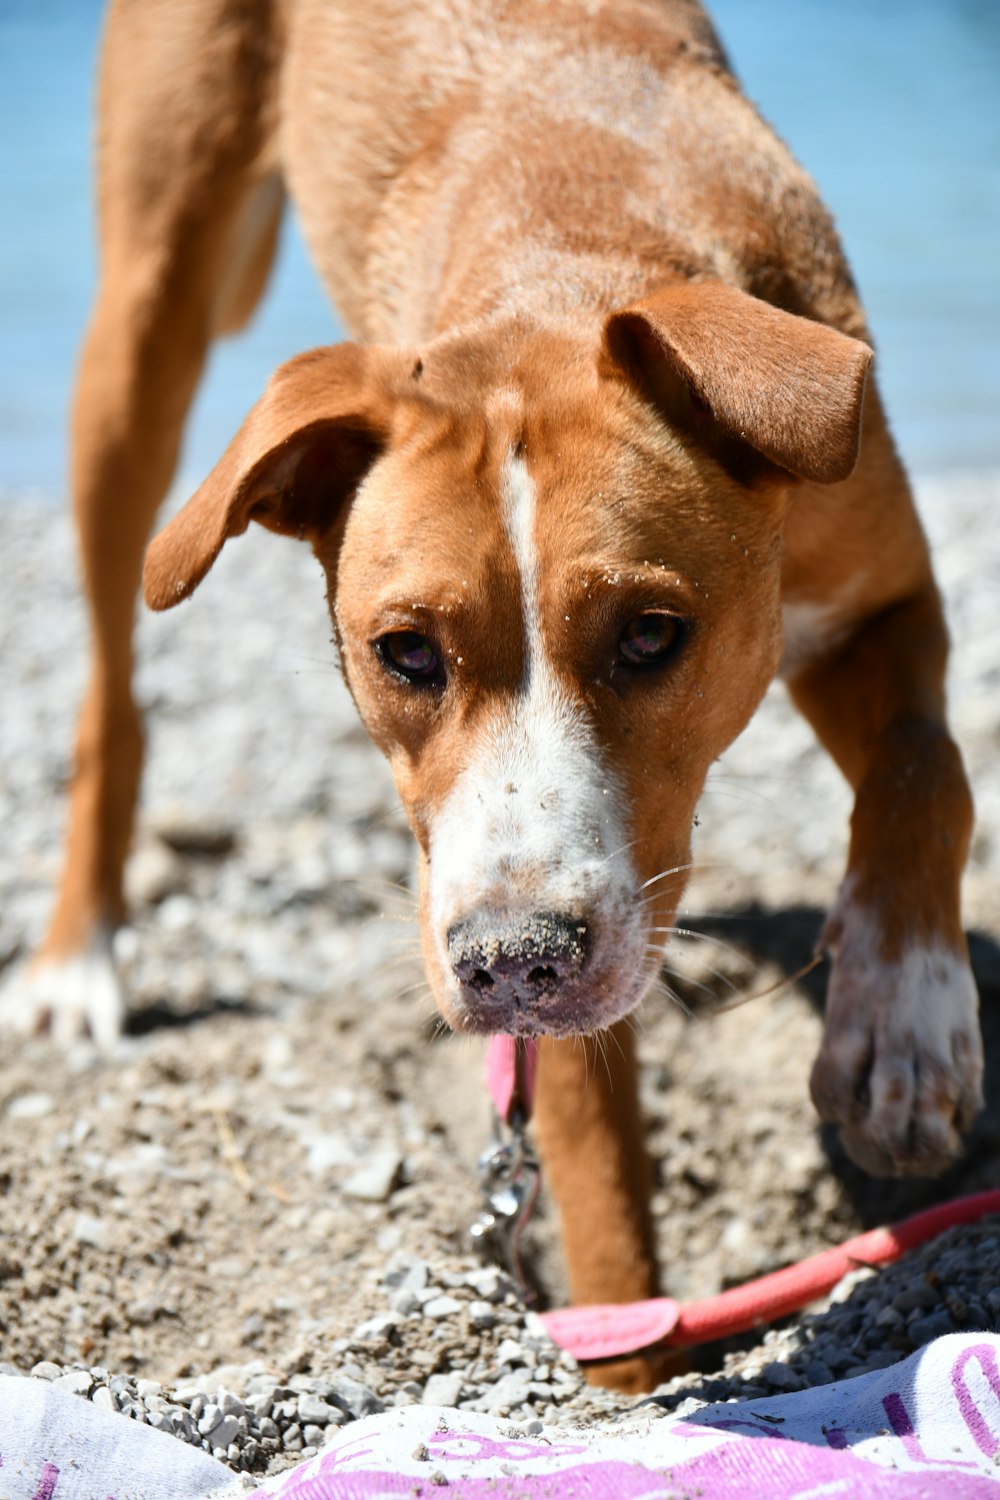 brown and white short coated dog on gray sand during daytime